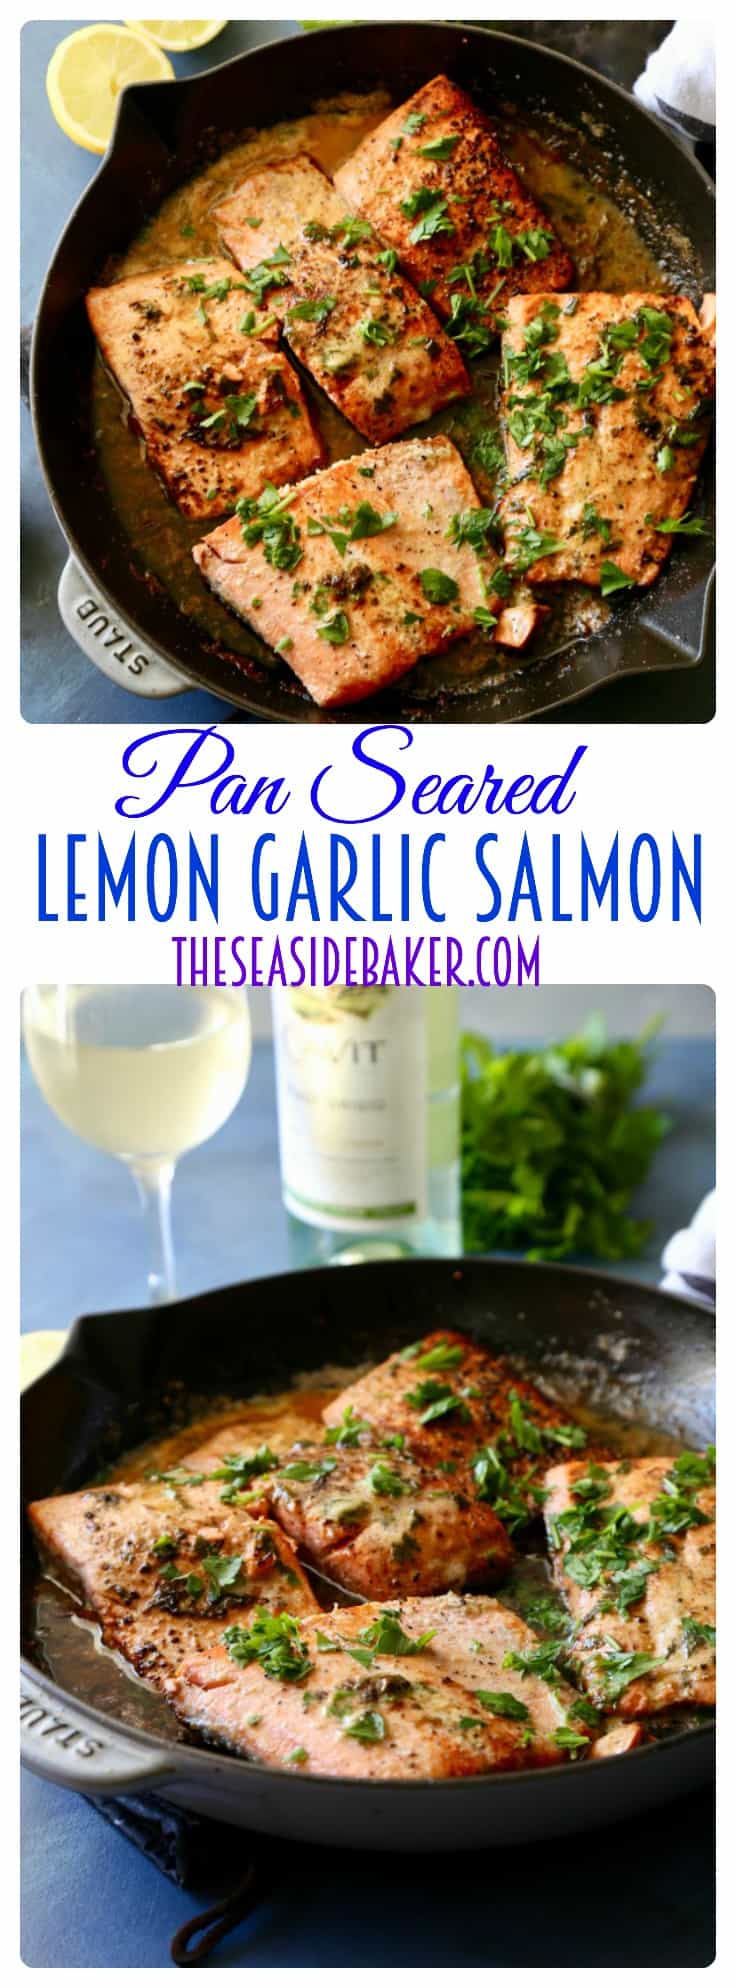 Quick and easy pan seared lemon garlic salmon that is full of flavor and ready in under 20 minutes!